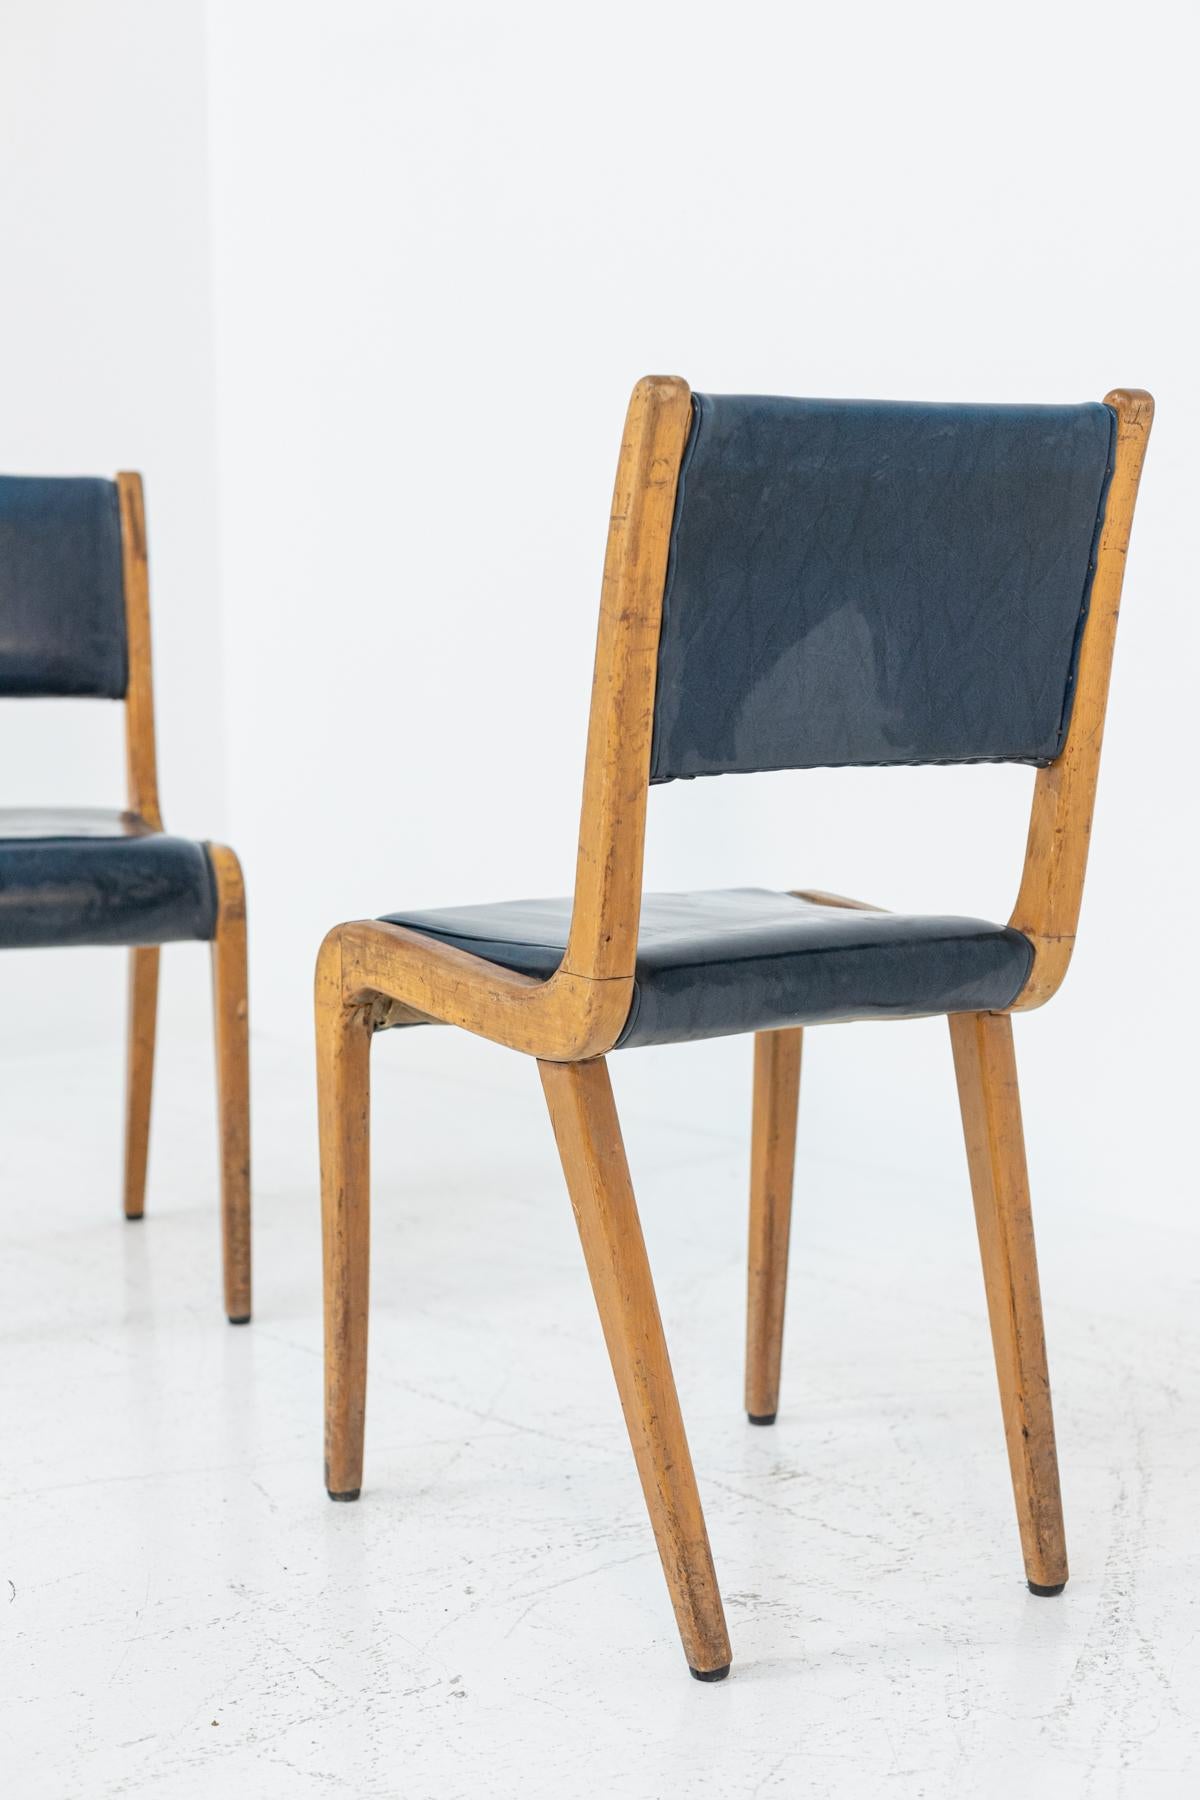 Mid-20th Century Pair of Italian Vintage Armchairs in Blue Fabric, 1950s For Sale